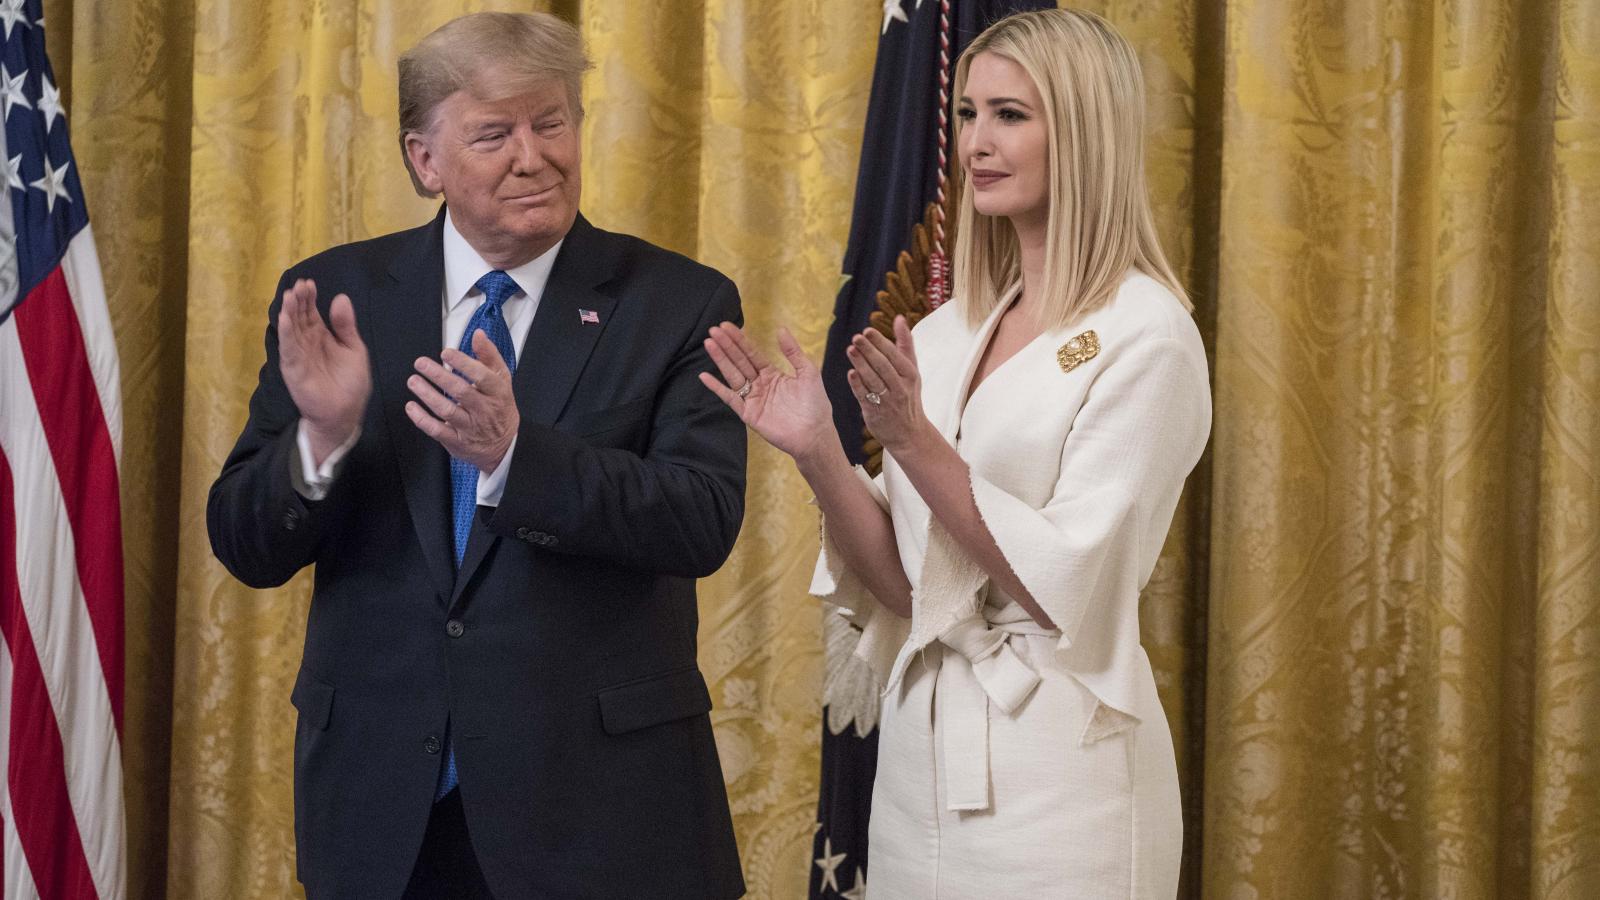 WASHINGTON, DC - JANUARY 31: US President Donald Trump and Senior Advisor to President Trump, Ivanka Trump participate in the "White House Summit on Human Trafficking: The 20th Anniversary of the Trafficking Victims Protection Act of 2000" event in the East Room of the White House on January 31, 2020 in Washington, DC. 